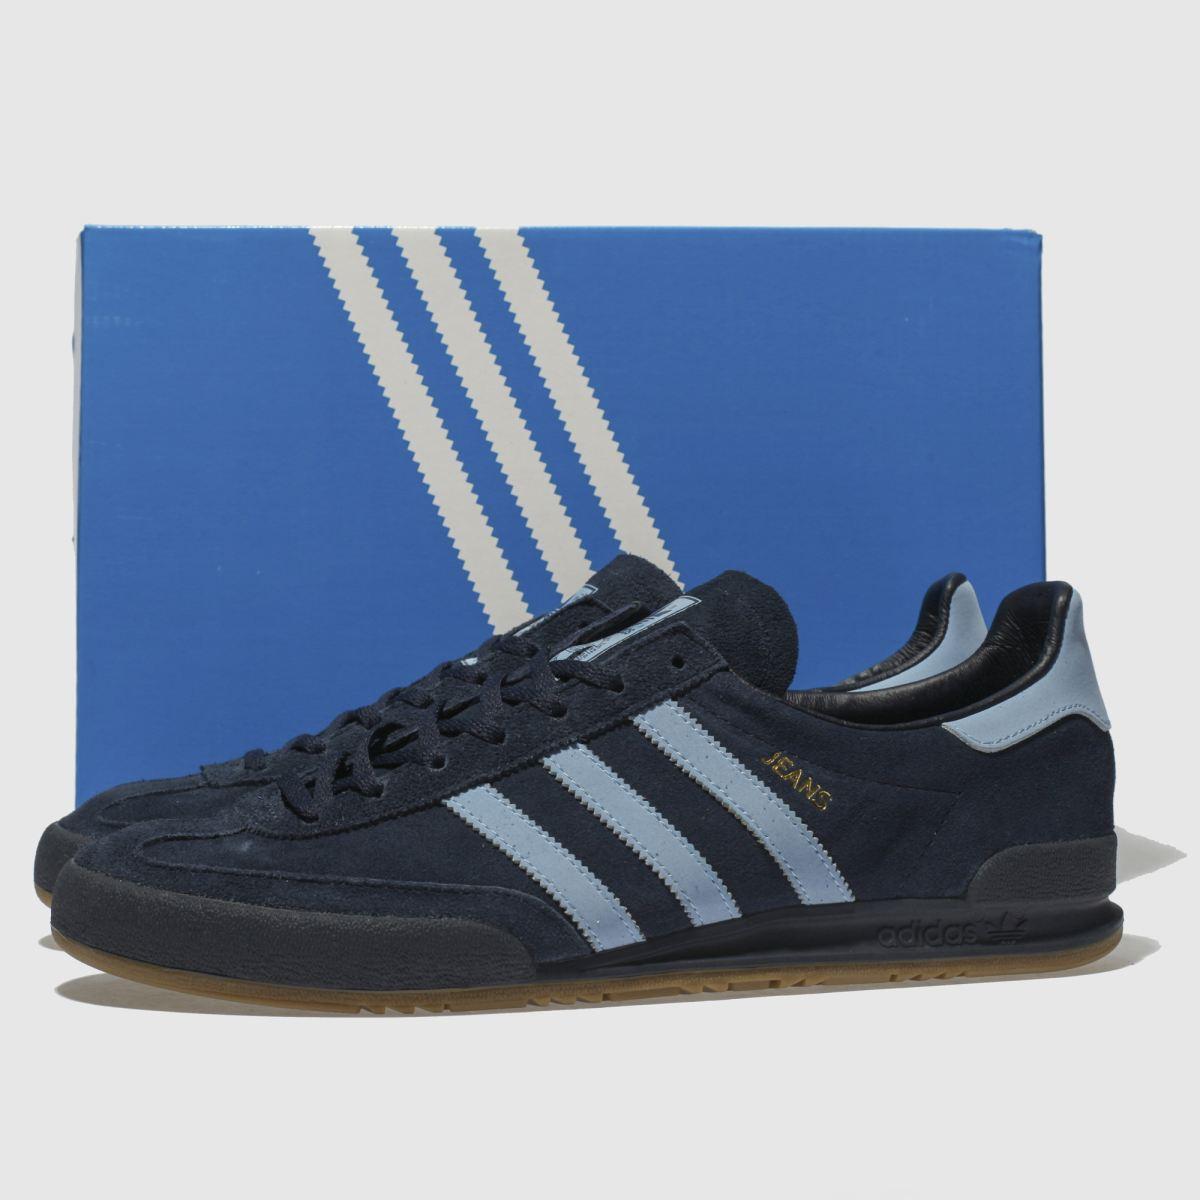 adidas blue jeans trainers